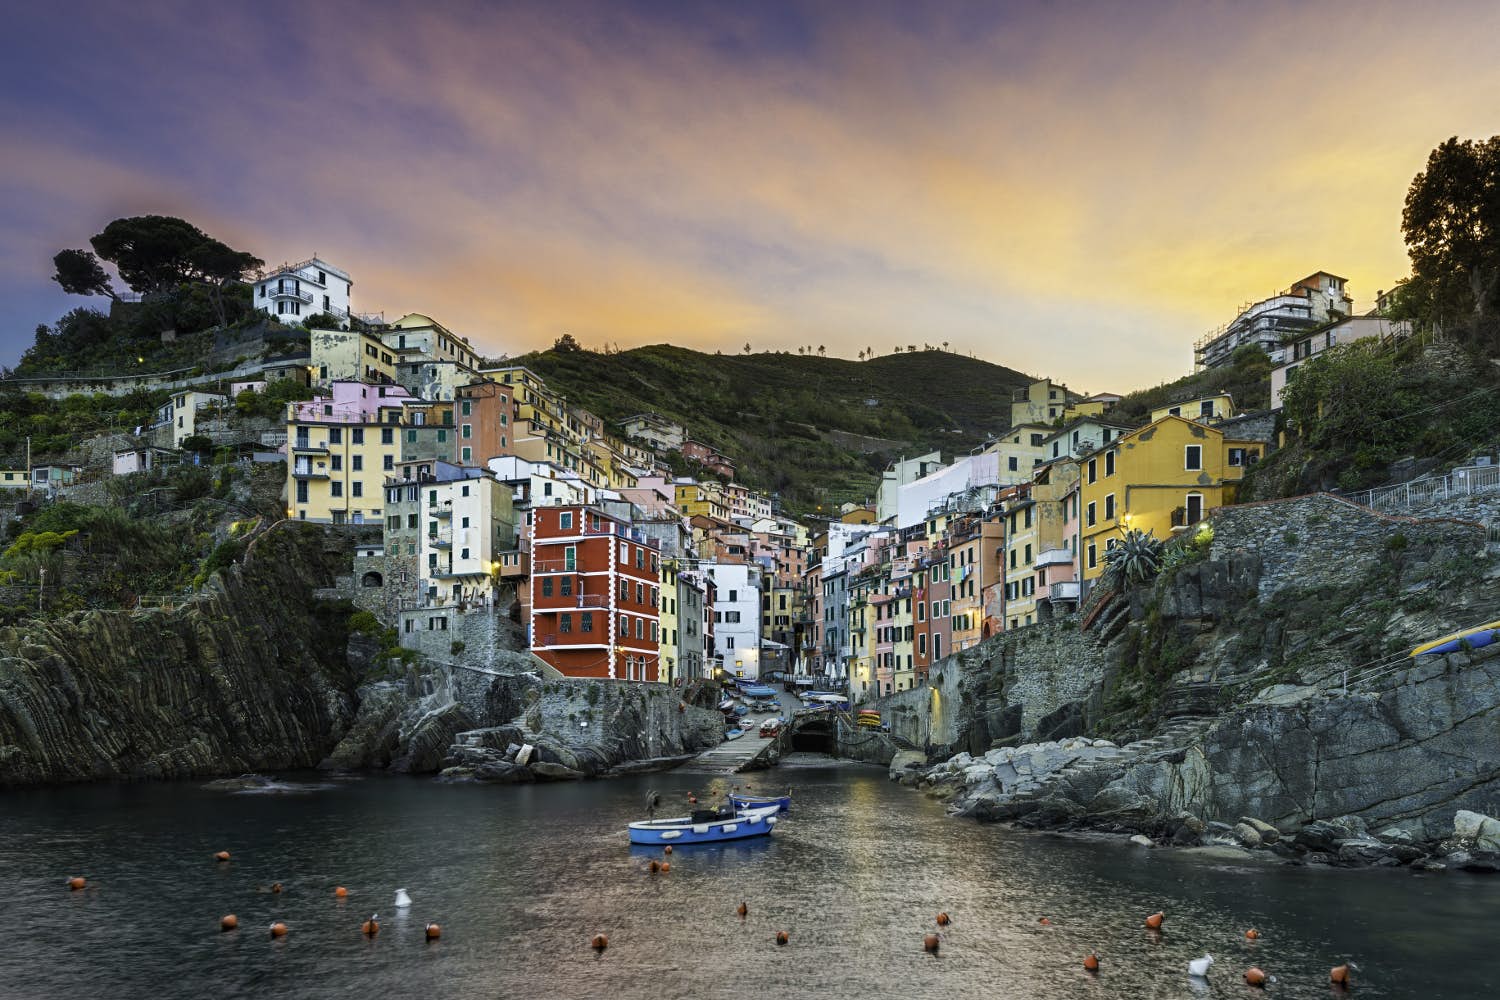 Hiking In Cinque Terre – Complete Guide Italy’s 5 Villages